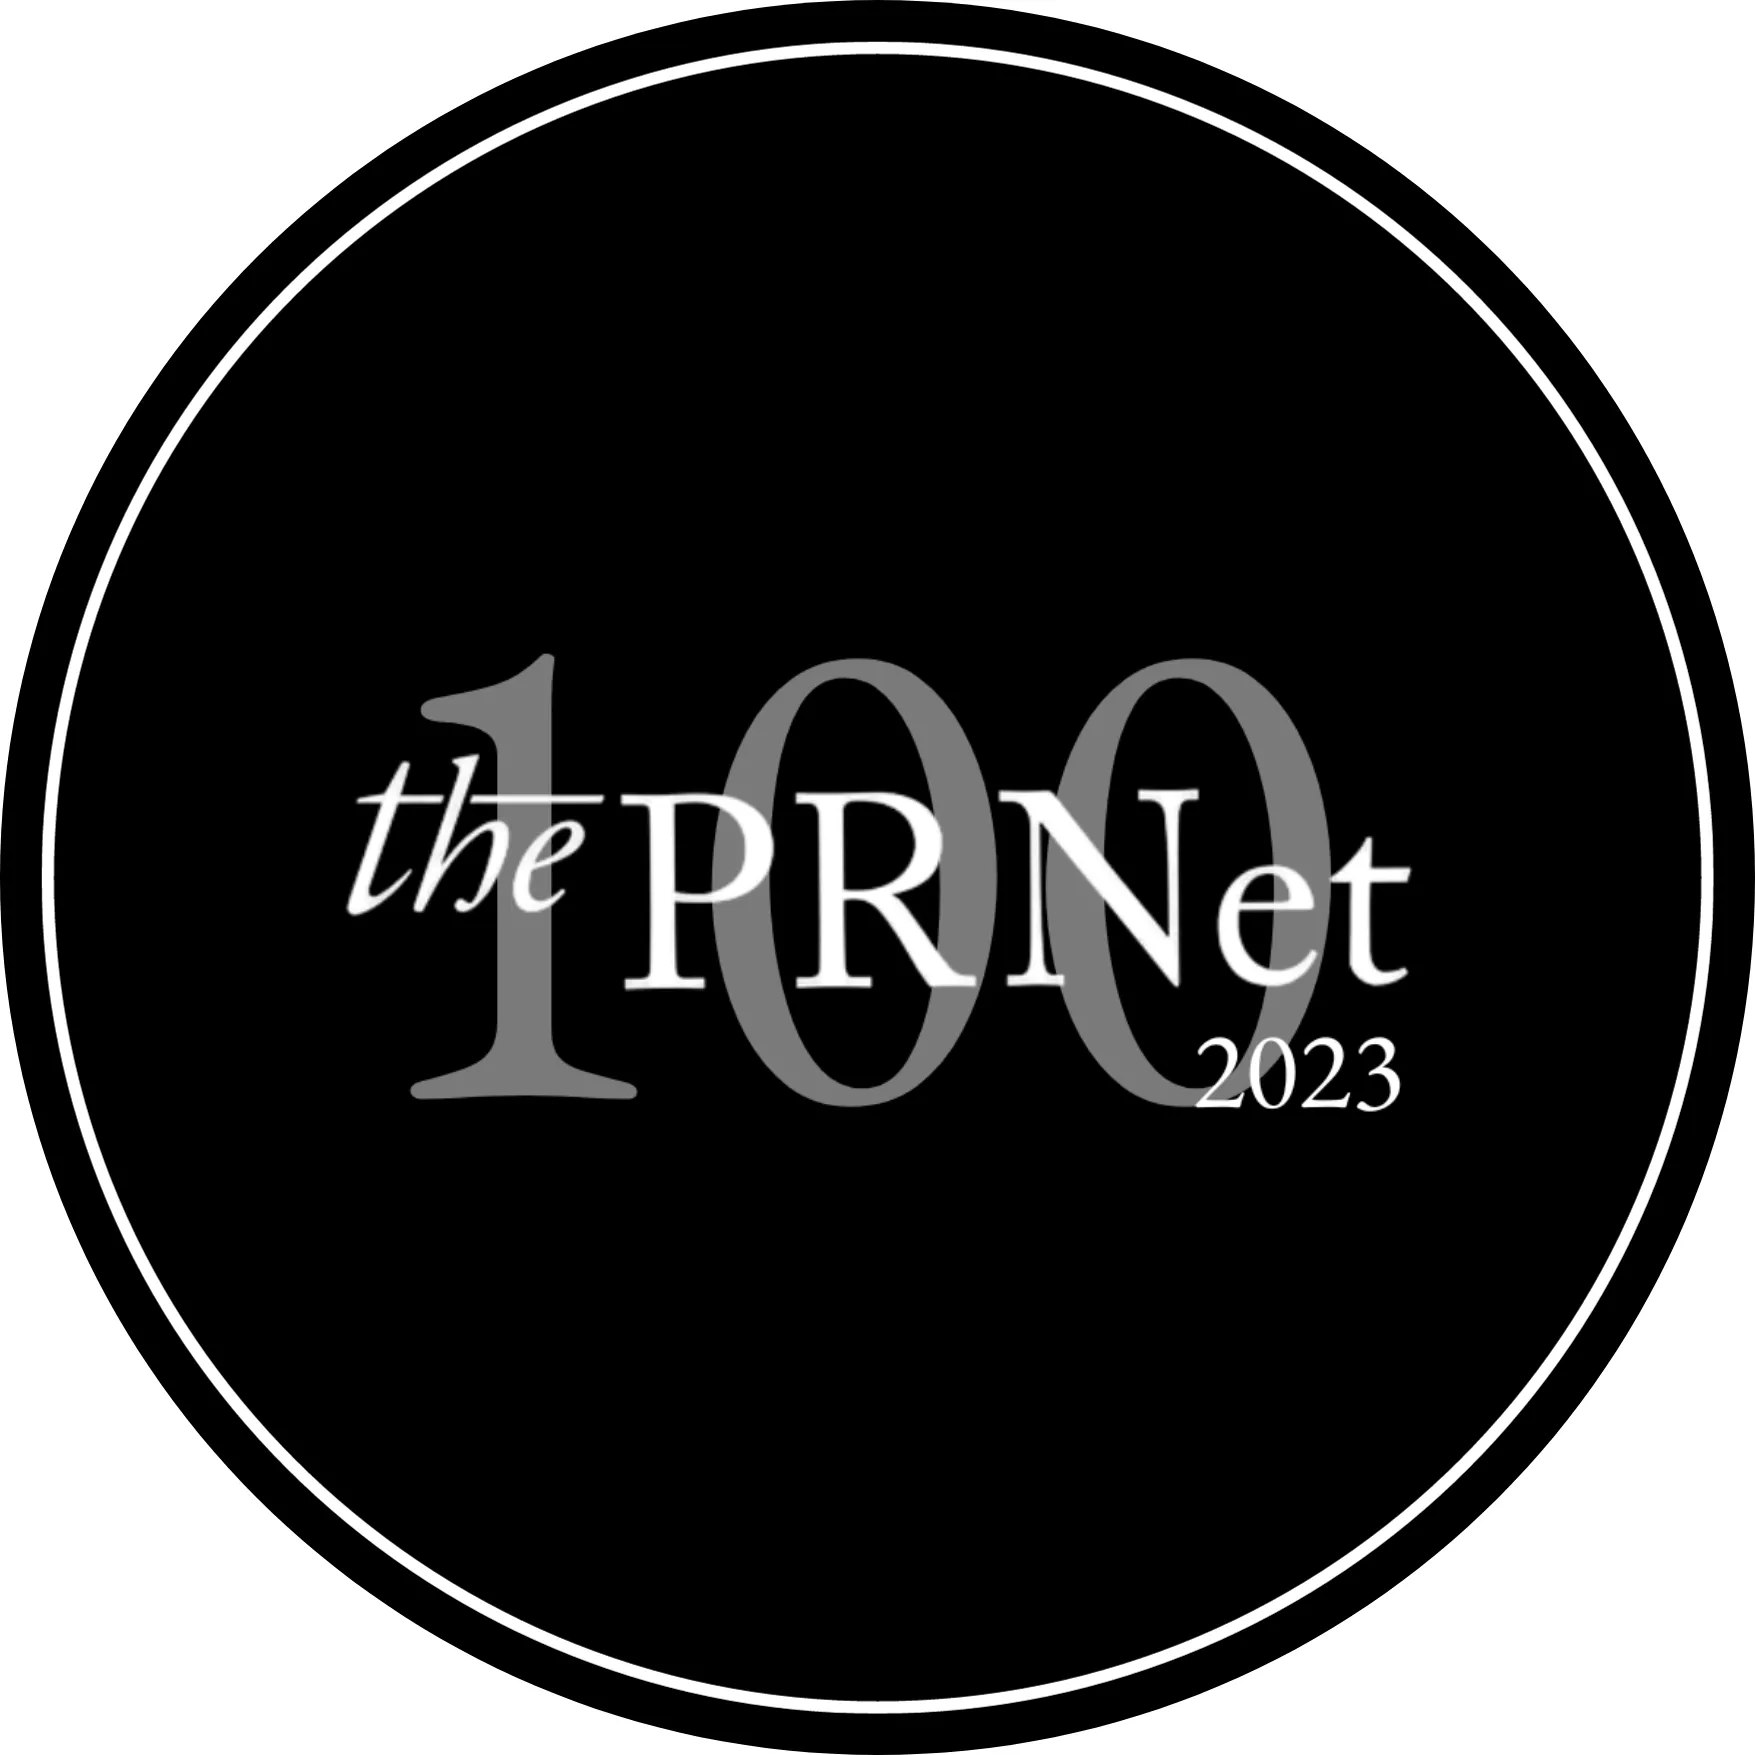 5WPR Named to the PR Net 100 List for the Third Year in a Row